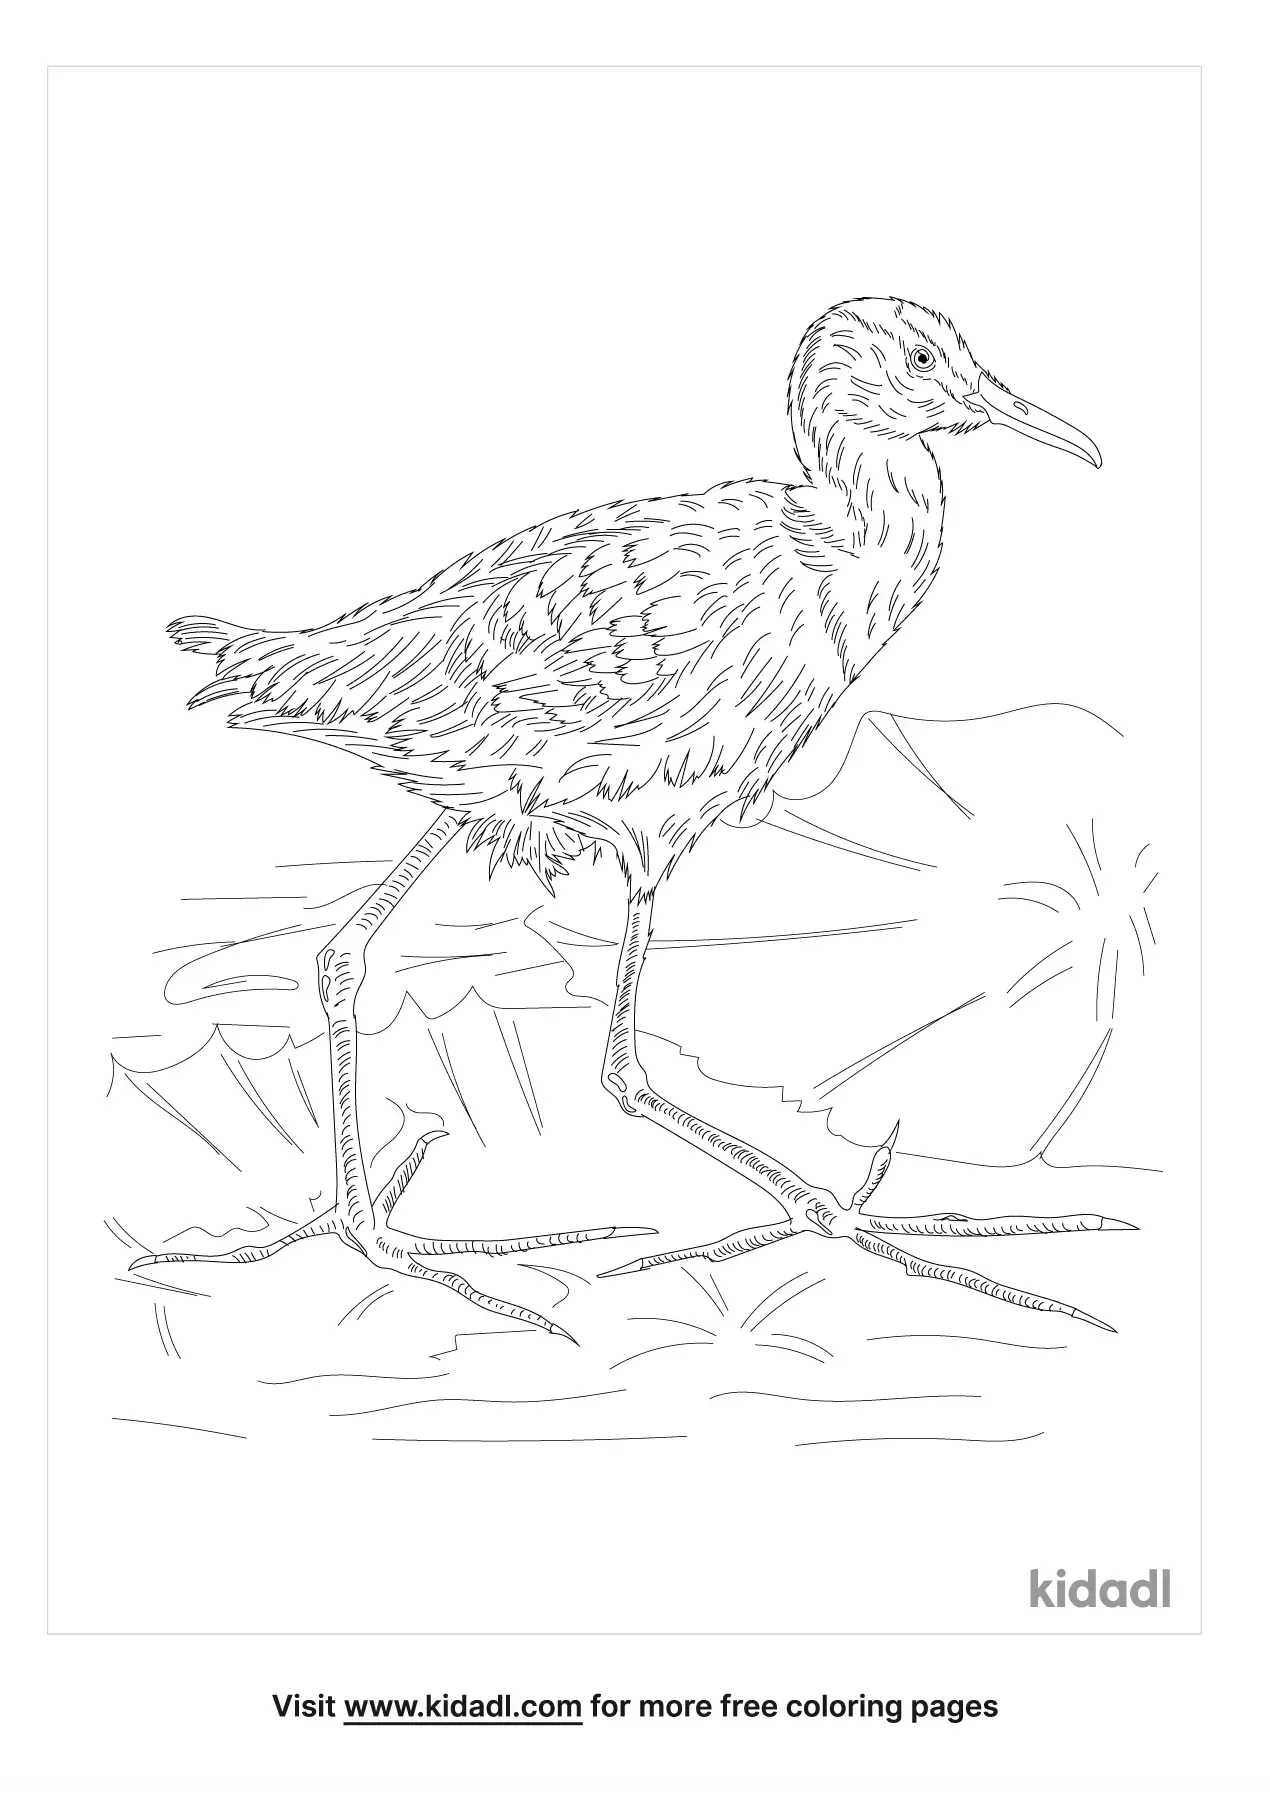 Free African Jacana Coloring Page | Coloring Page Printables | Kidadl